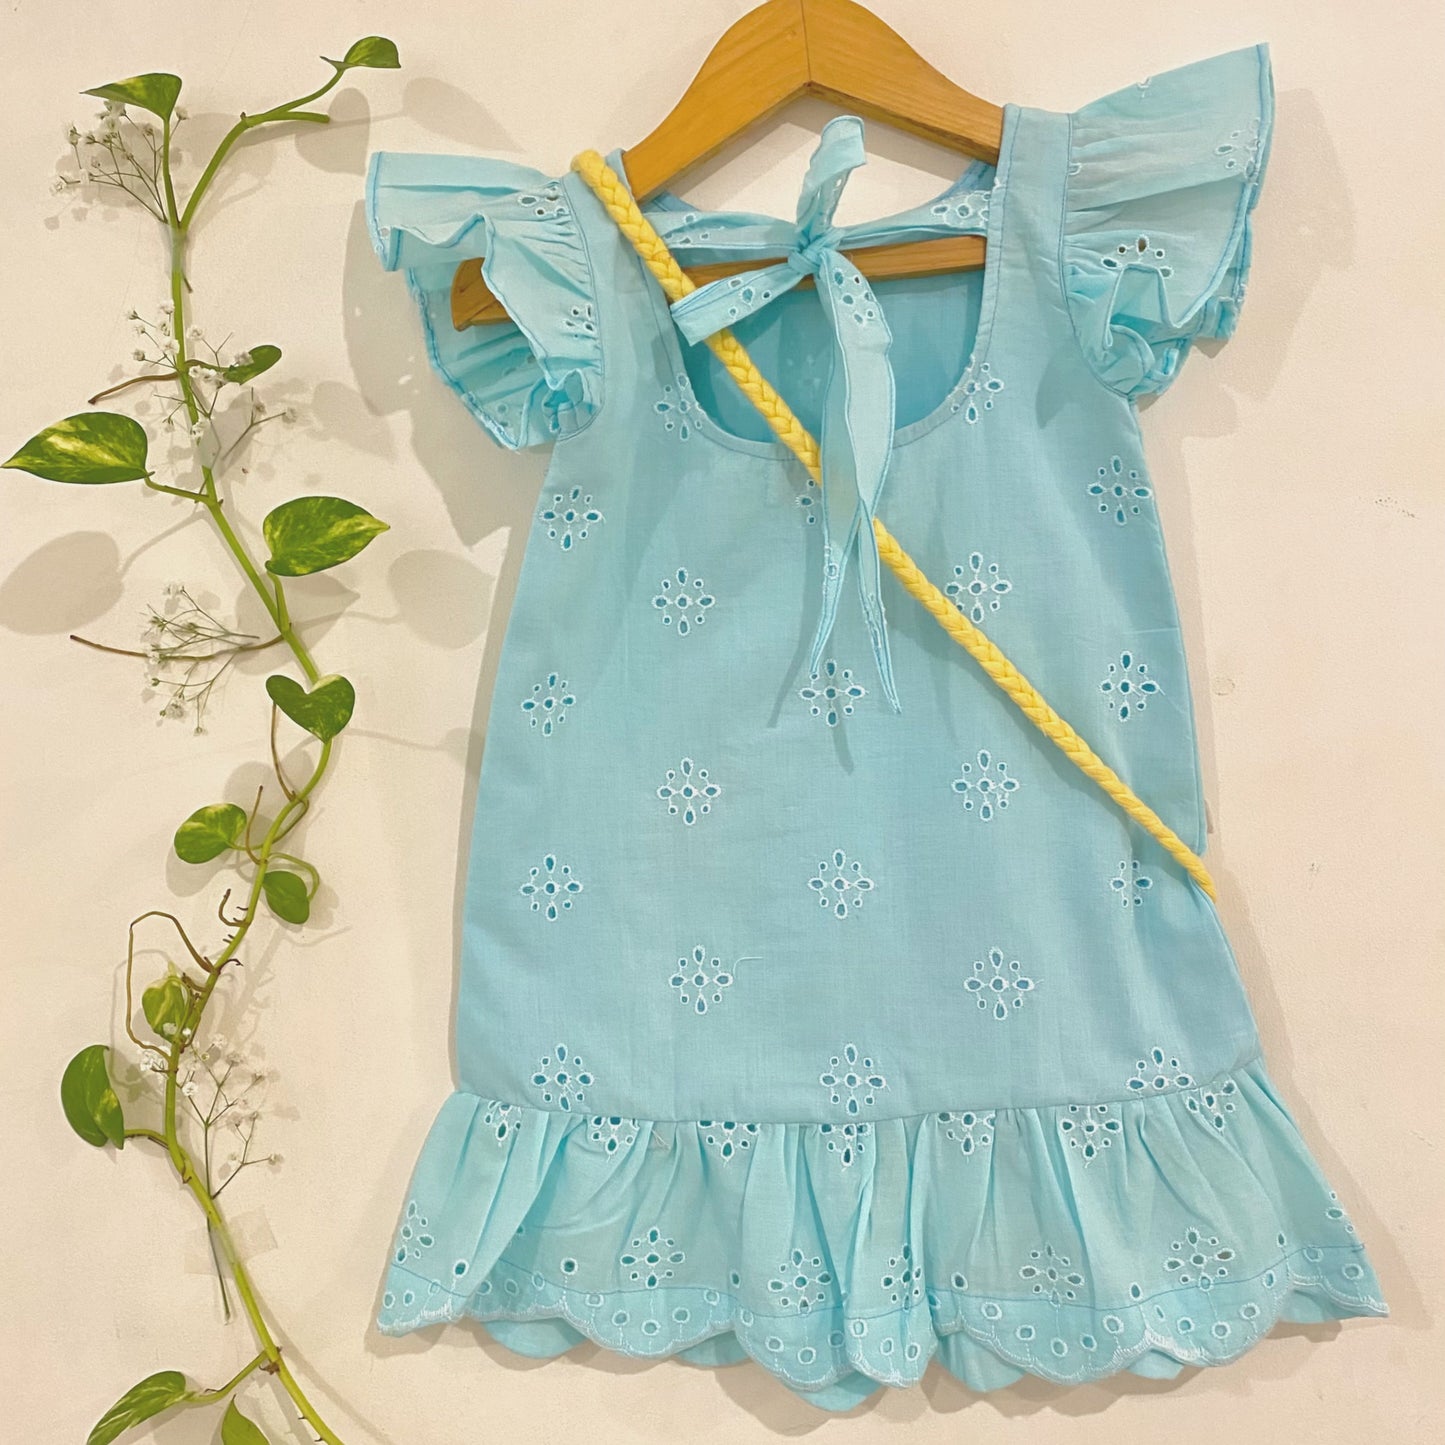 Aqua Eyelet Embroidery Dress with floral sling bag